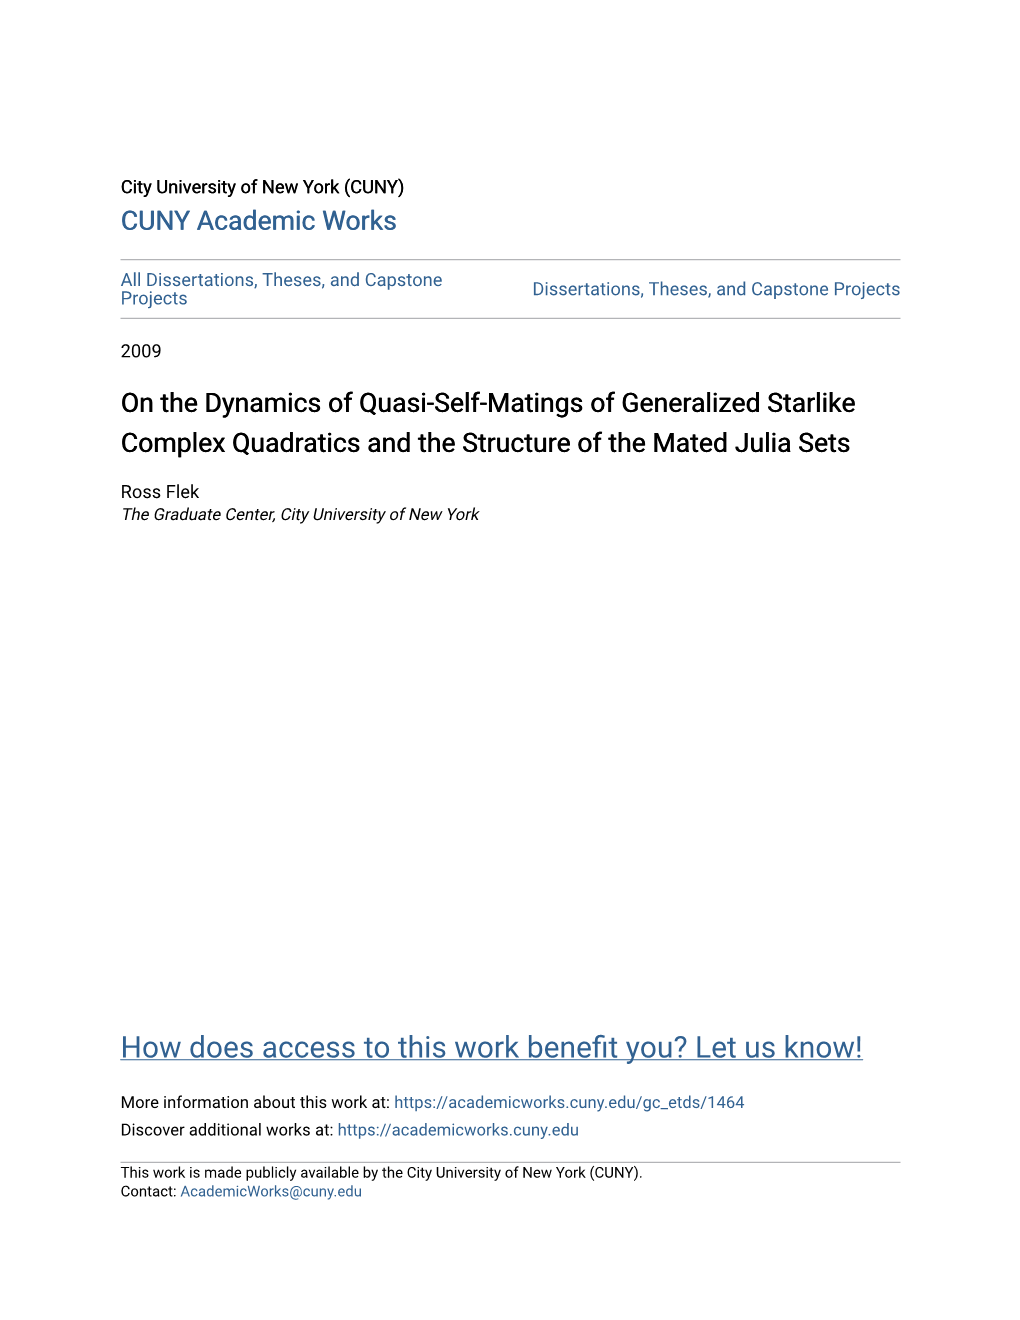 On the Dynamics of Quasi-Self-Matings of Generalized Starlike Complex Quadratics and the Structure of the Mated Julia Sets